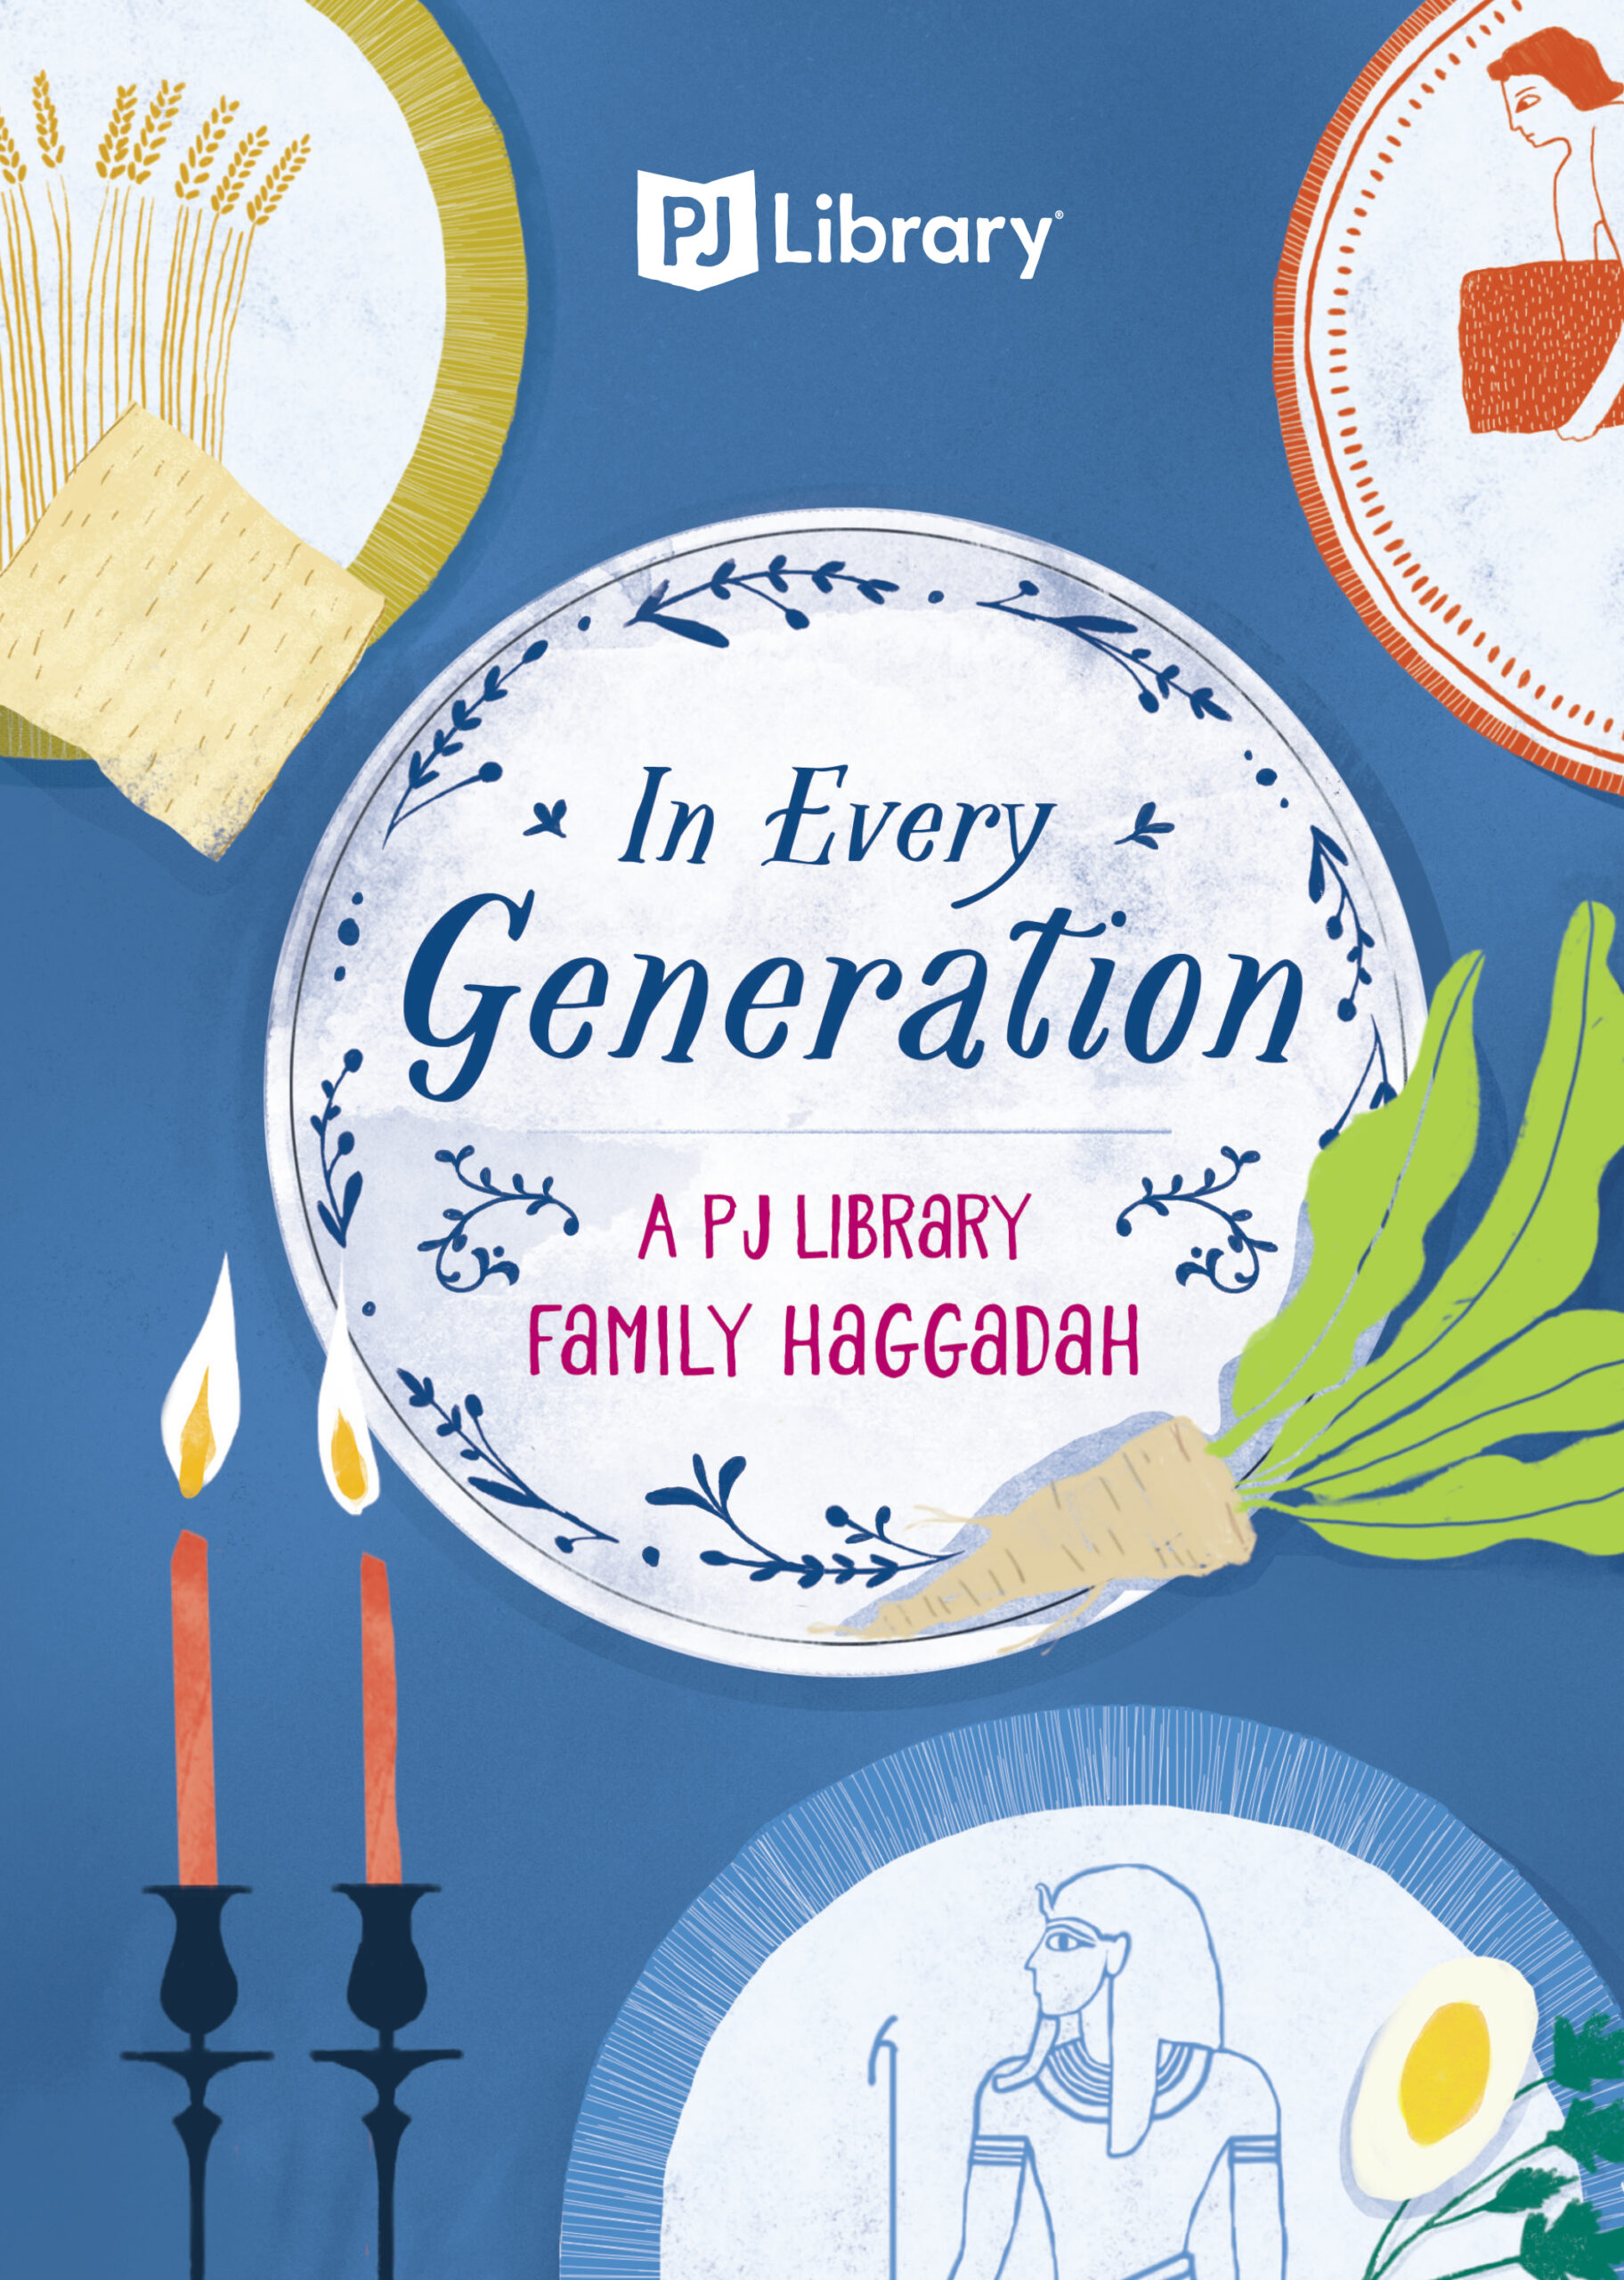 pj-library-brings-the-passover-story-to-life-for-kids-and-families-with